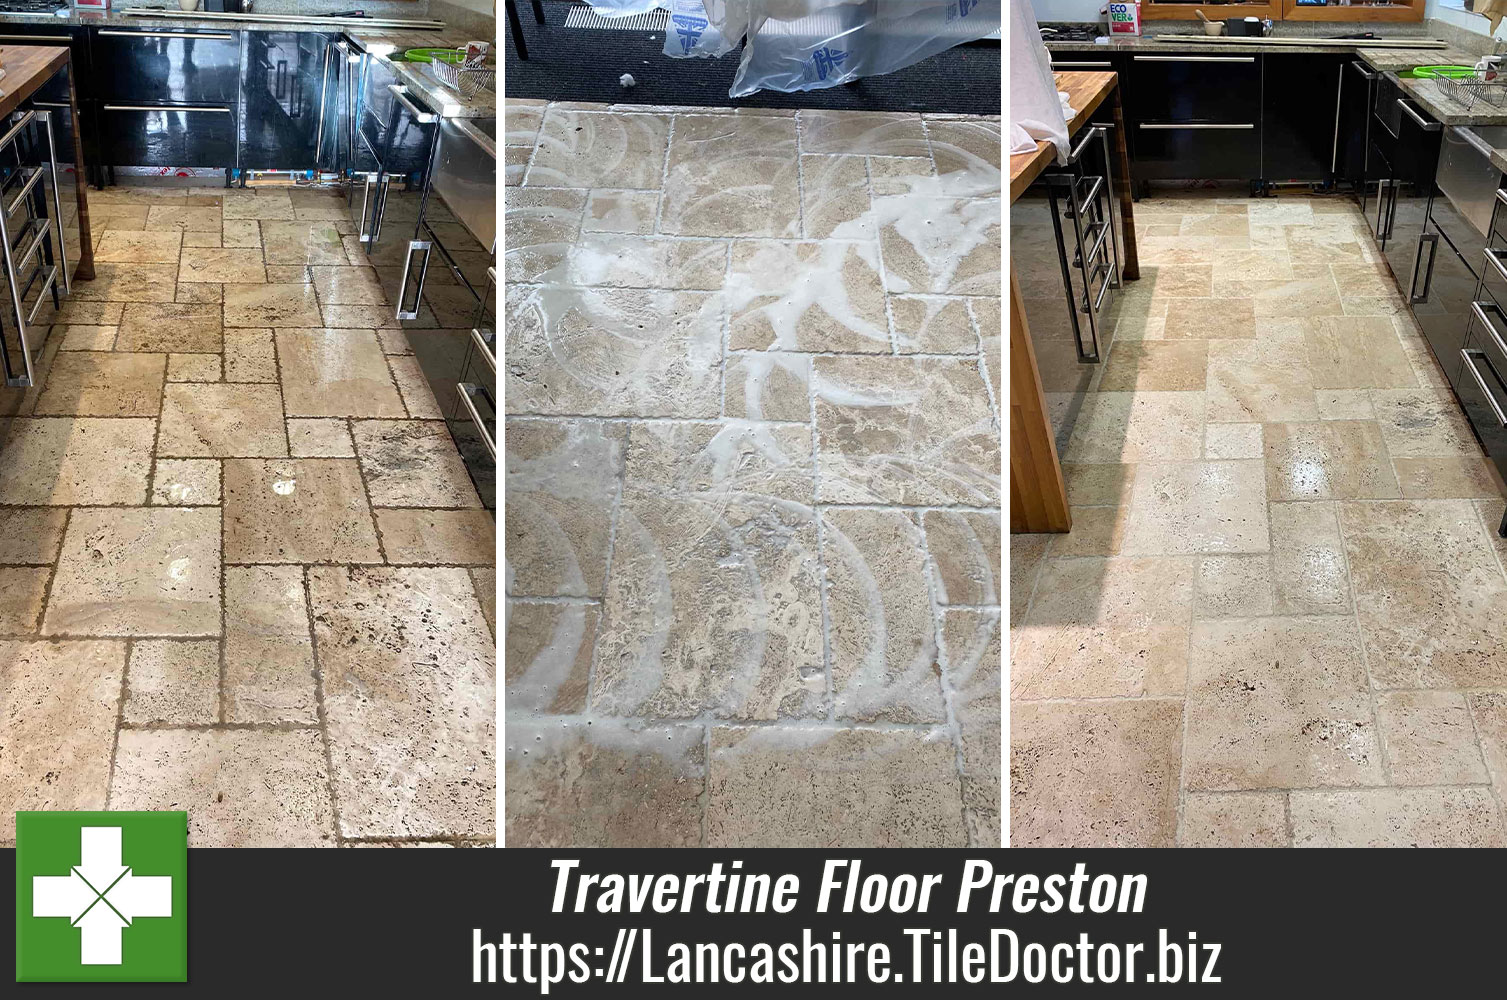 Removing Tough Grout Stains with Tile Doctor Remove and Go in Preston